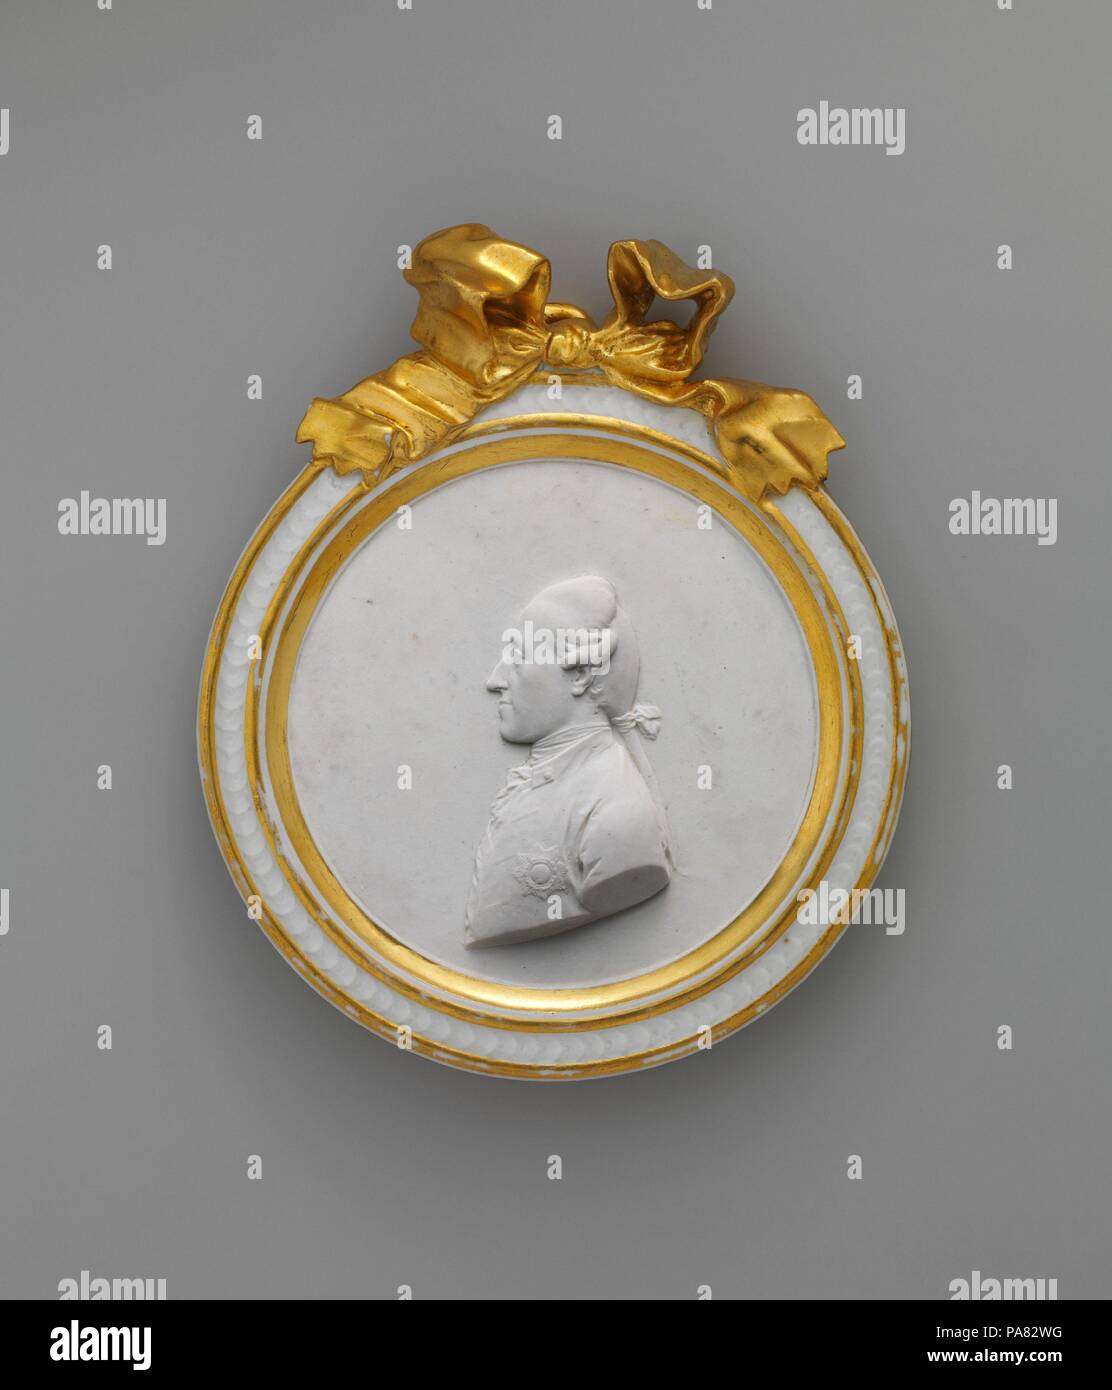 Albert von Sachsen-Teschen. Culture: Austrian, Vienna. Dimensions: Overall: 5 5/8 x 4 3/4 x 1 1/8 in. (14.3 x 12.1 x 2.9 cm). Manufactory: Imperial Porcelain Manufactory  (Vienna, 1744-1864). Date: ca. 1775.  These small, highly decorative plaques are representative of the purely Neoclassical porcelain luxury products that were commissioned as mementos for visiting dignitaries and family members or sent as tokens of appreciation. Museum: Metropolitan Museum of Art, New York, USA. Stock Photo